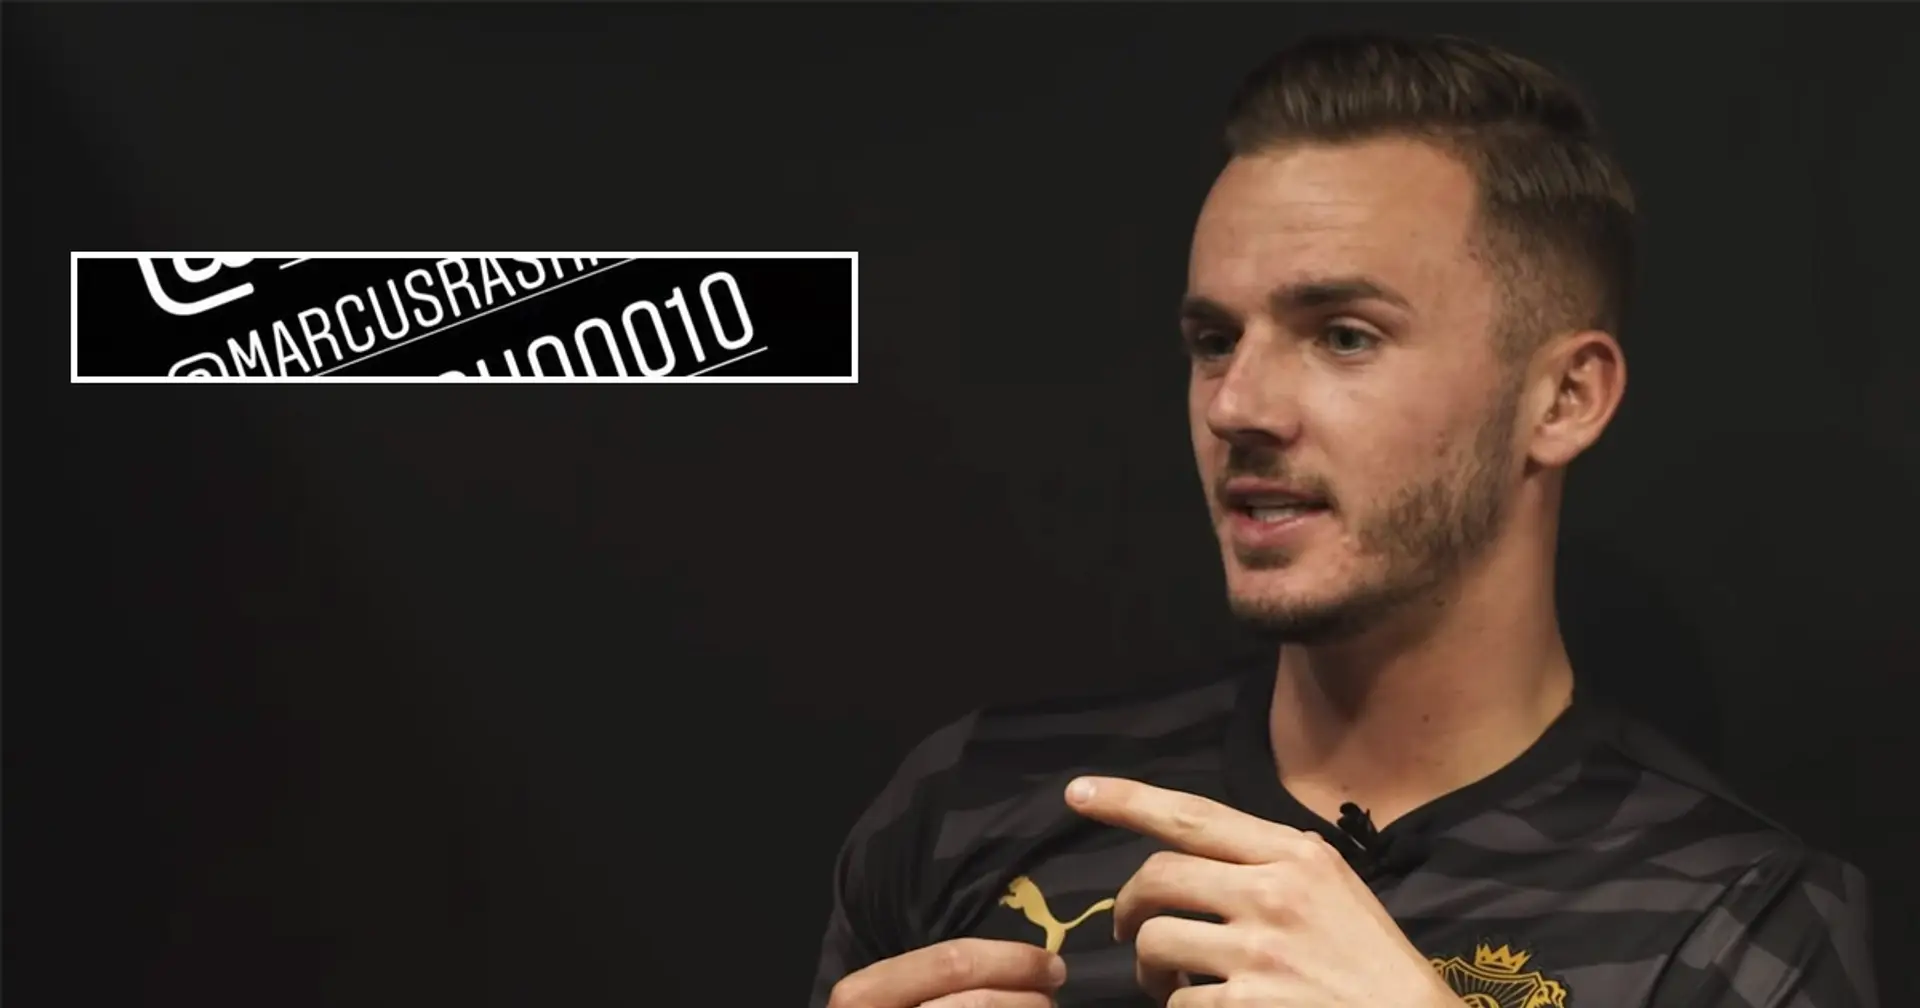 James Maddison reignites United speculation as list of his best-ever teammates includes two Red Devils and Jadon Sancho